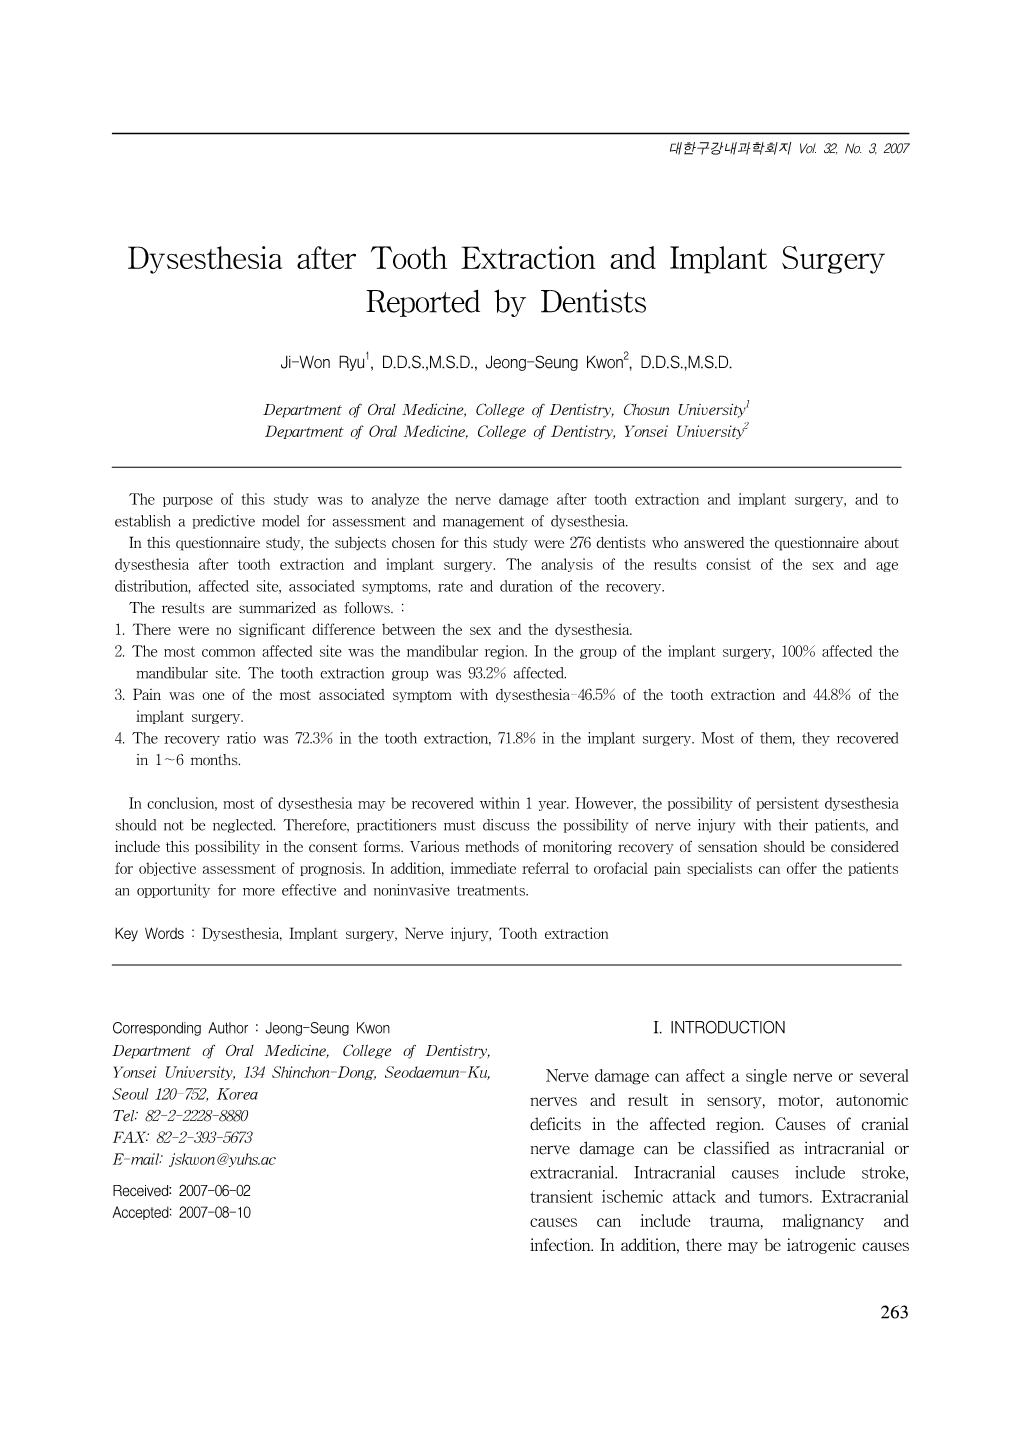 Dysesthesia After Tooth Extraction and Implant Surgery Reported by Dentists